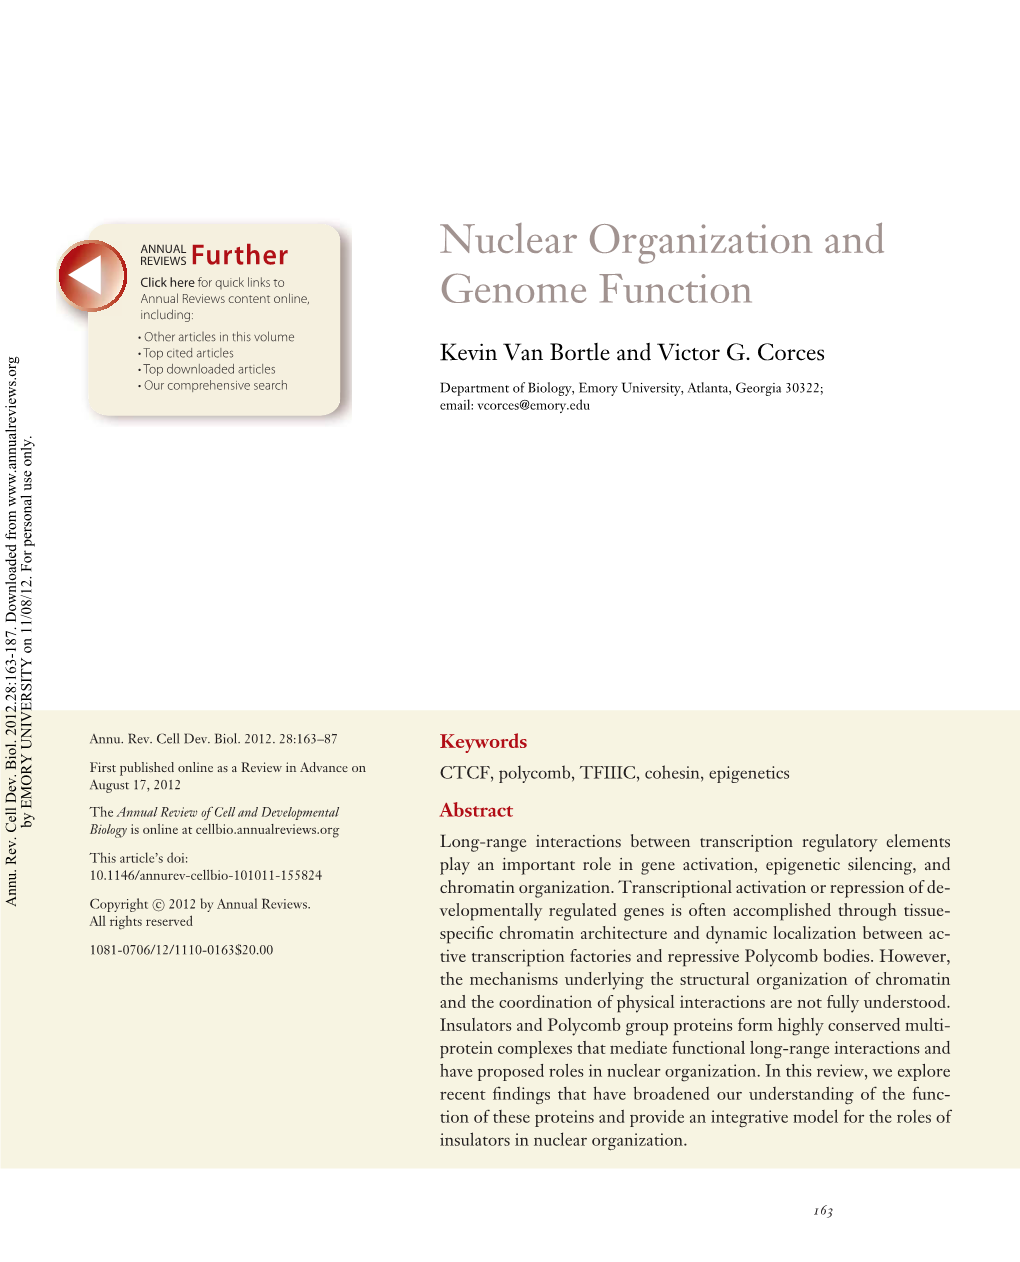 Nuclear Organization and Genome Function